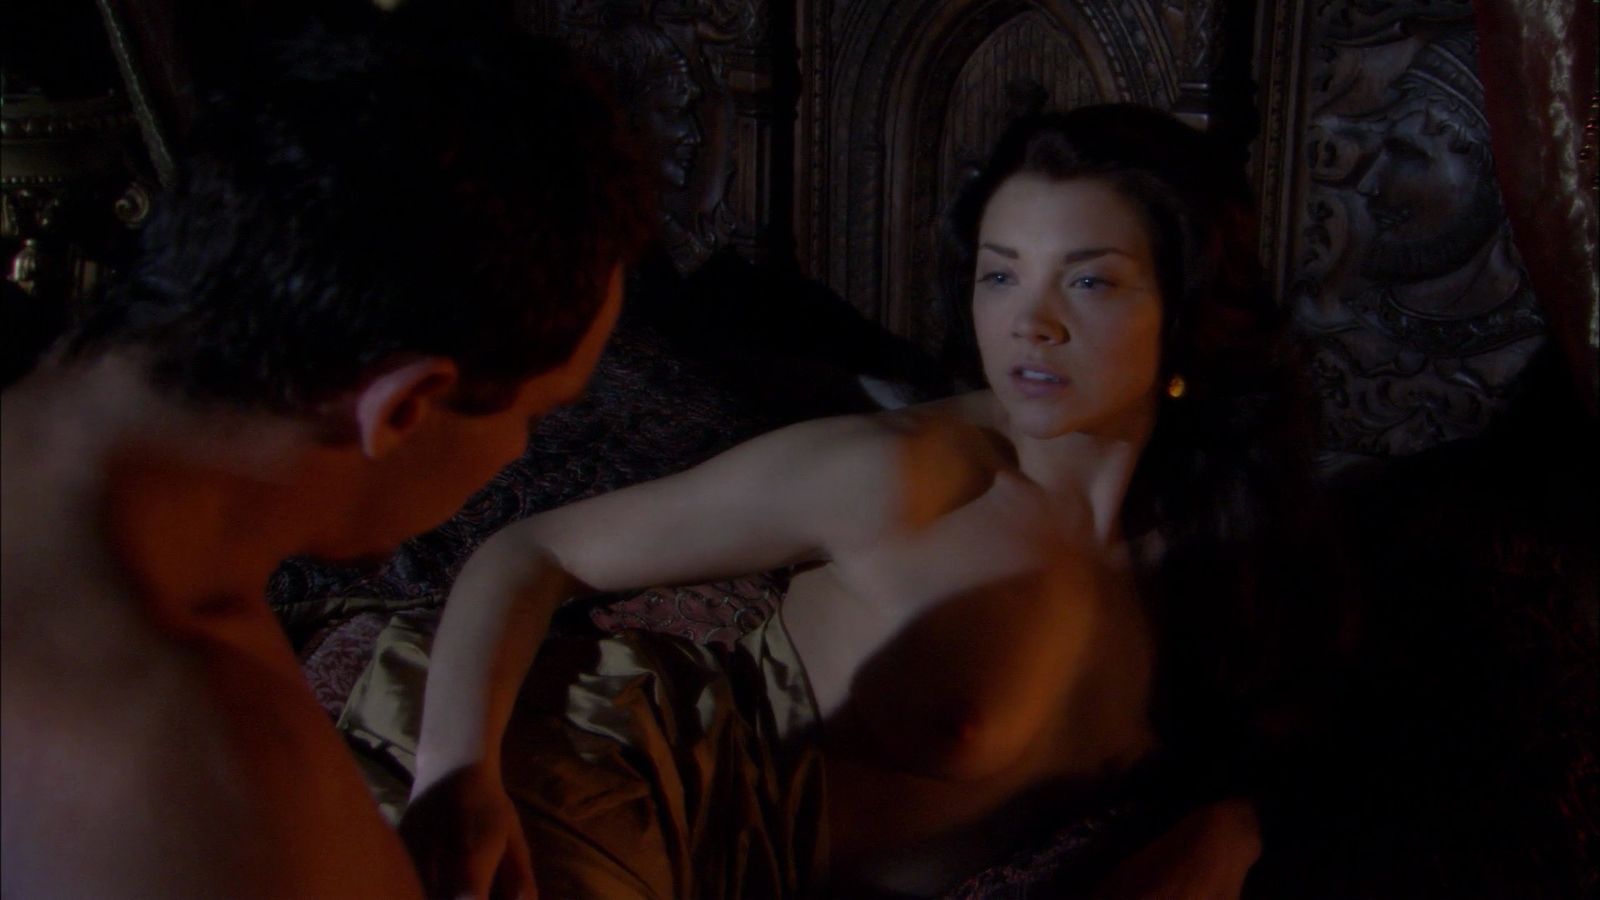 Natalie Dormer nude in The Tudors. Rating = Unrated